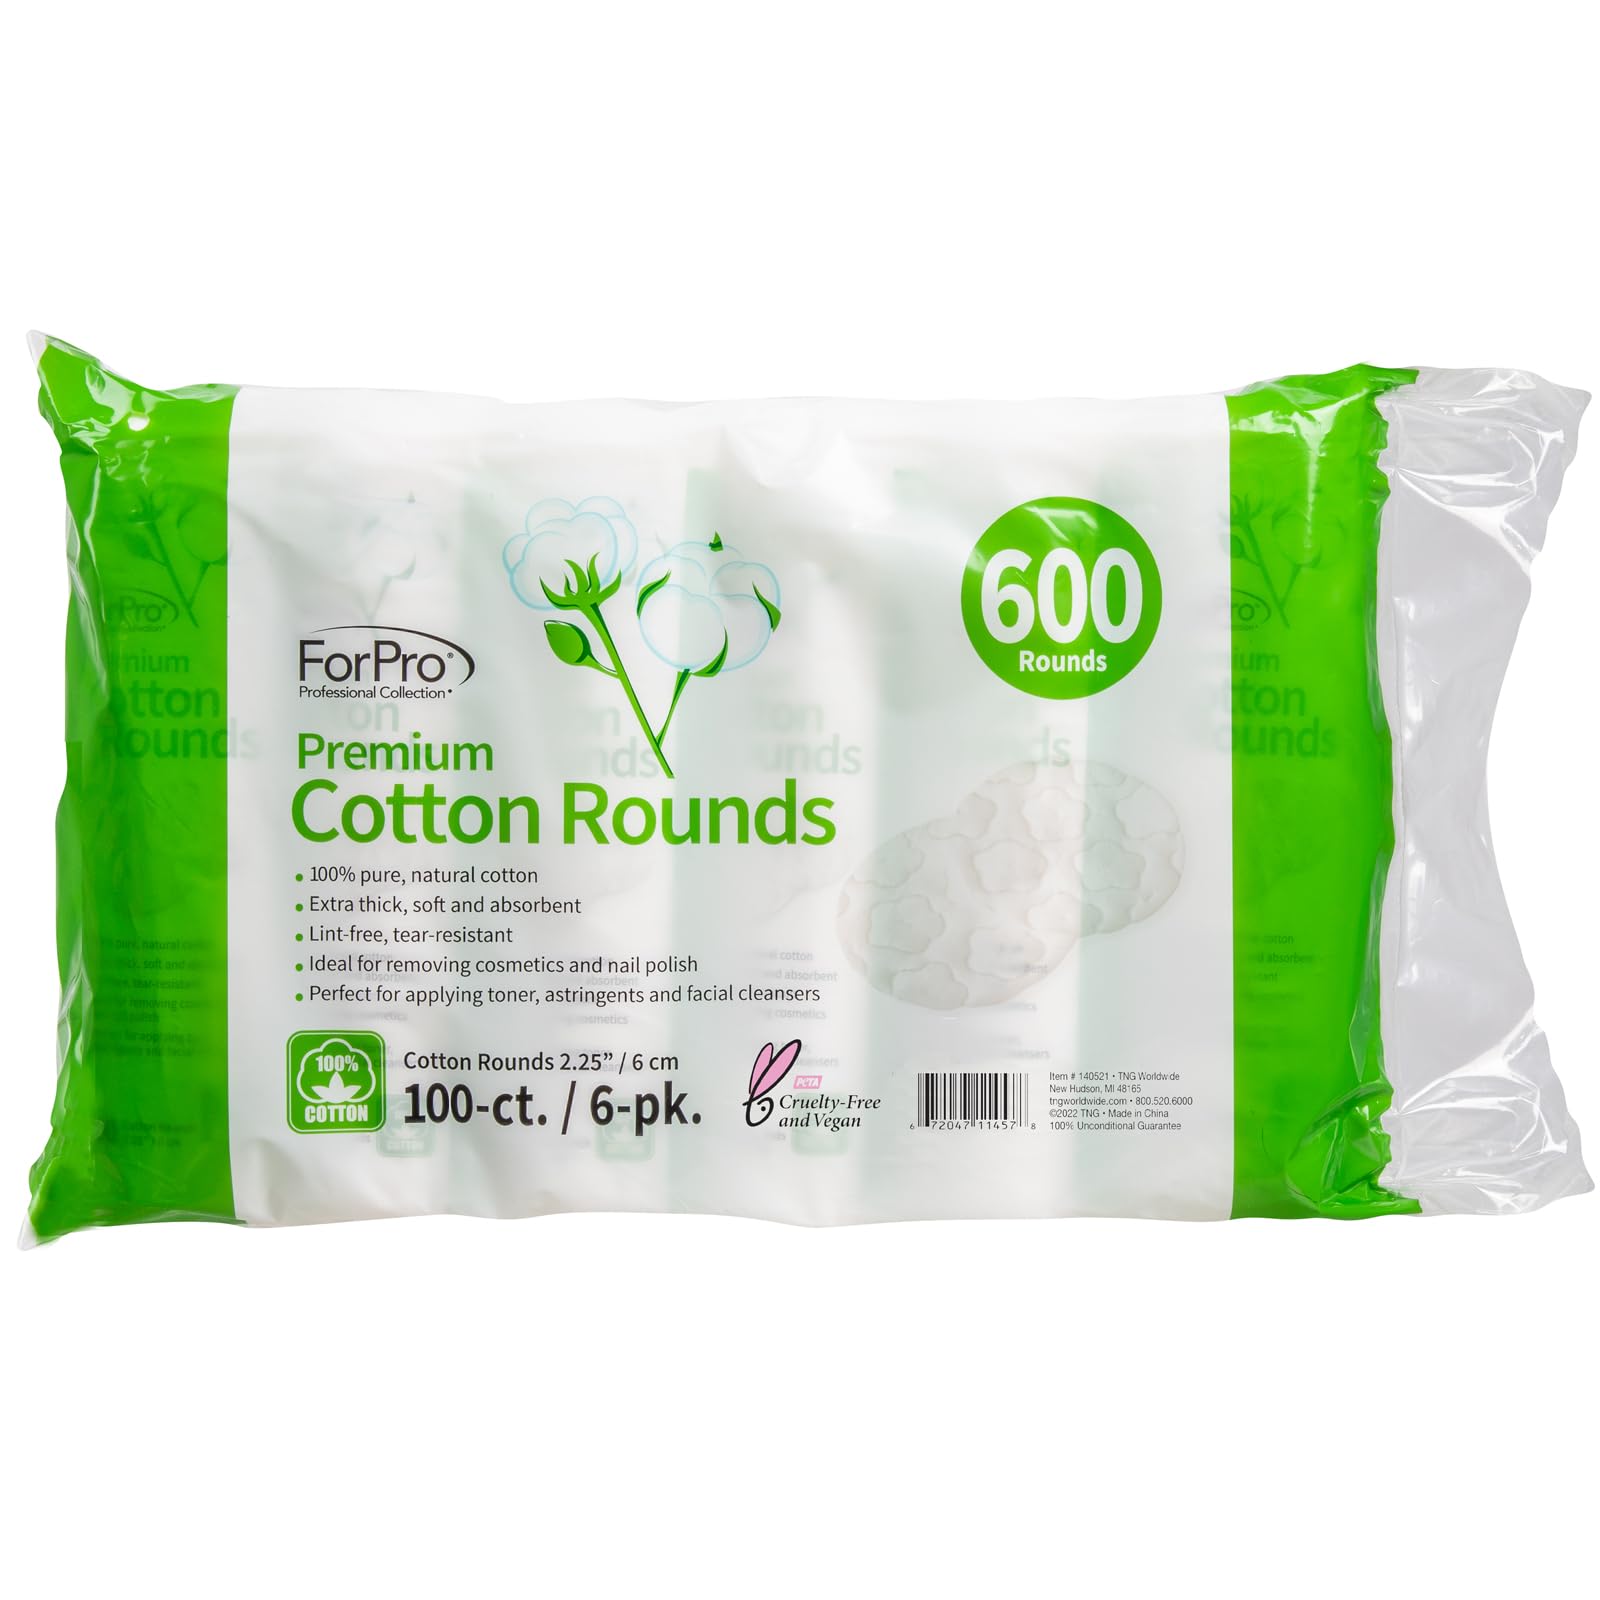 ForPro Premium Cotton Rounds, 100% Cotton, Non-Tearing, Lint-Free, for Cosmetic, Nail, and Personal Use, 2.25”, 600-Count (Pack of 6-100 Cotton Rounds)